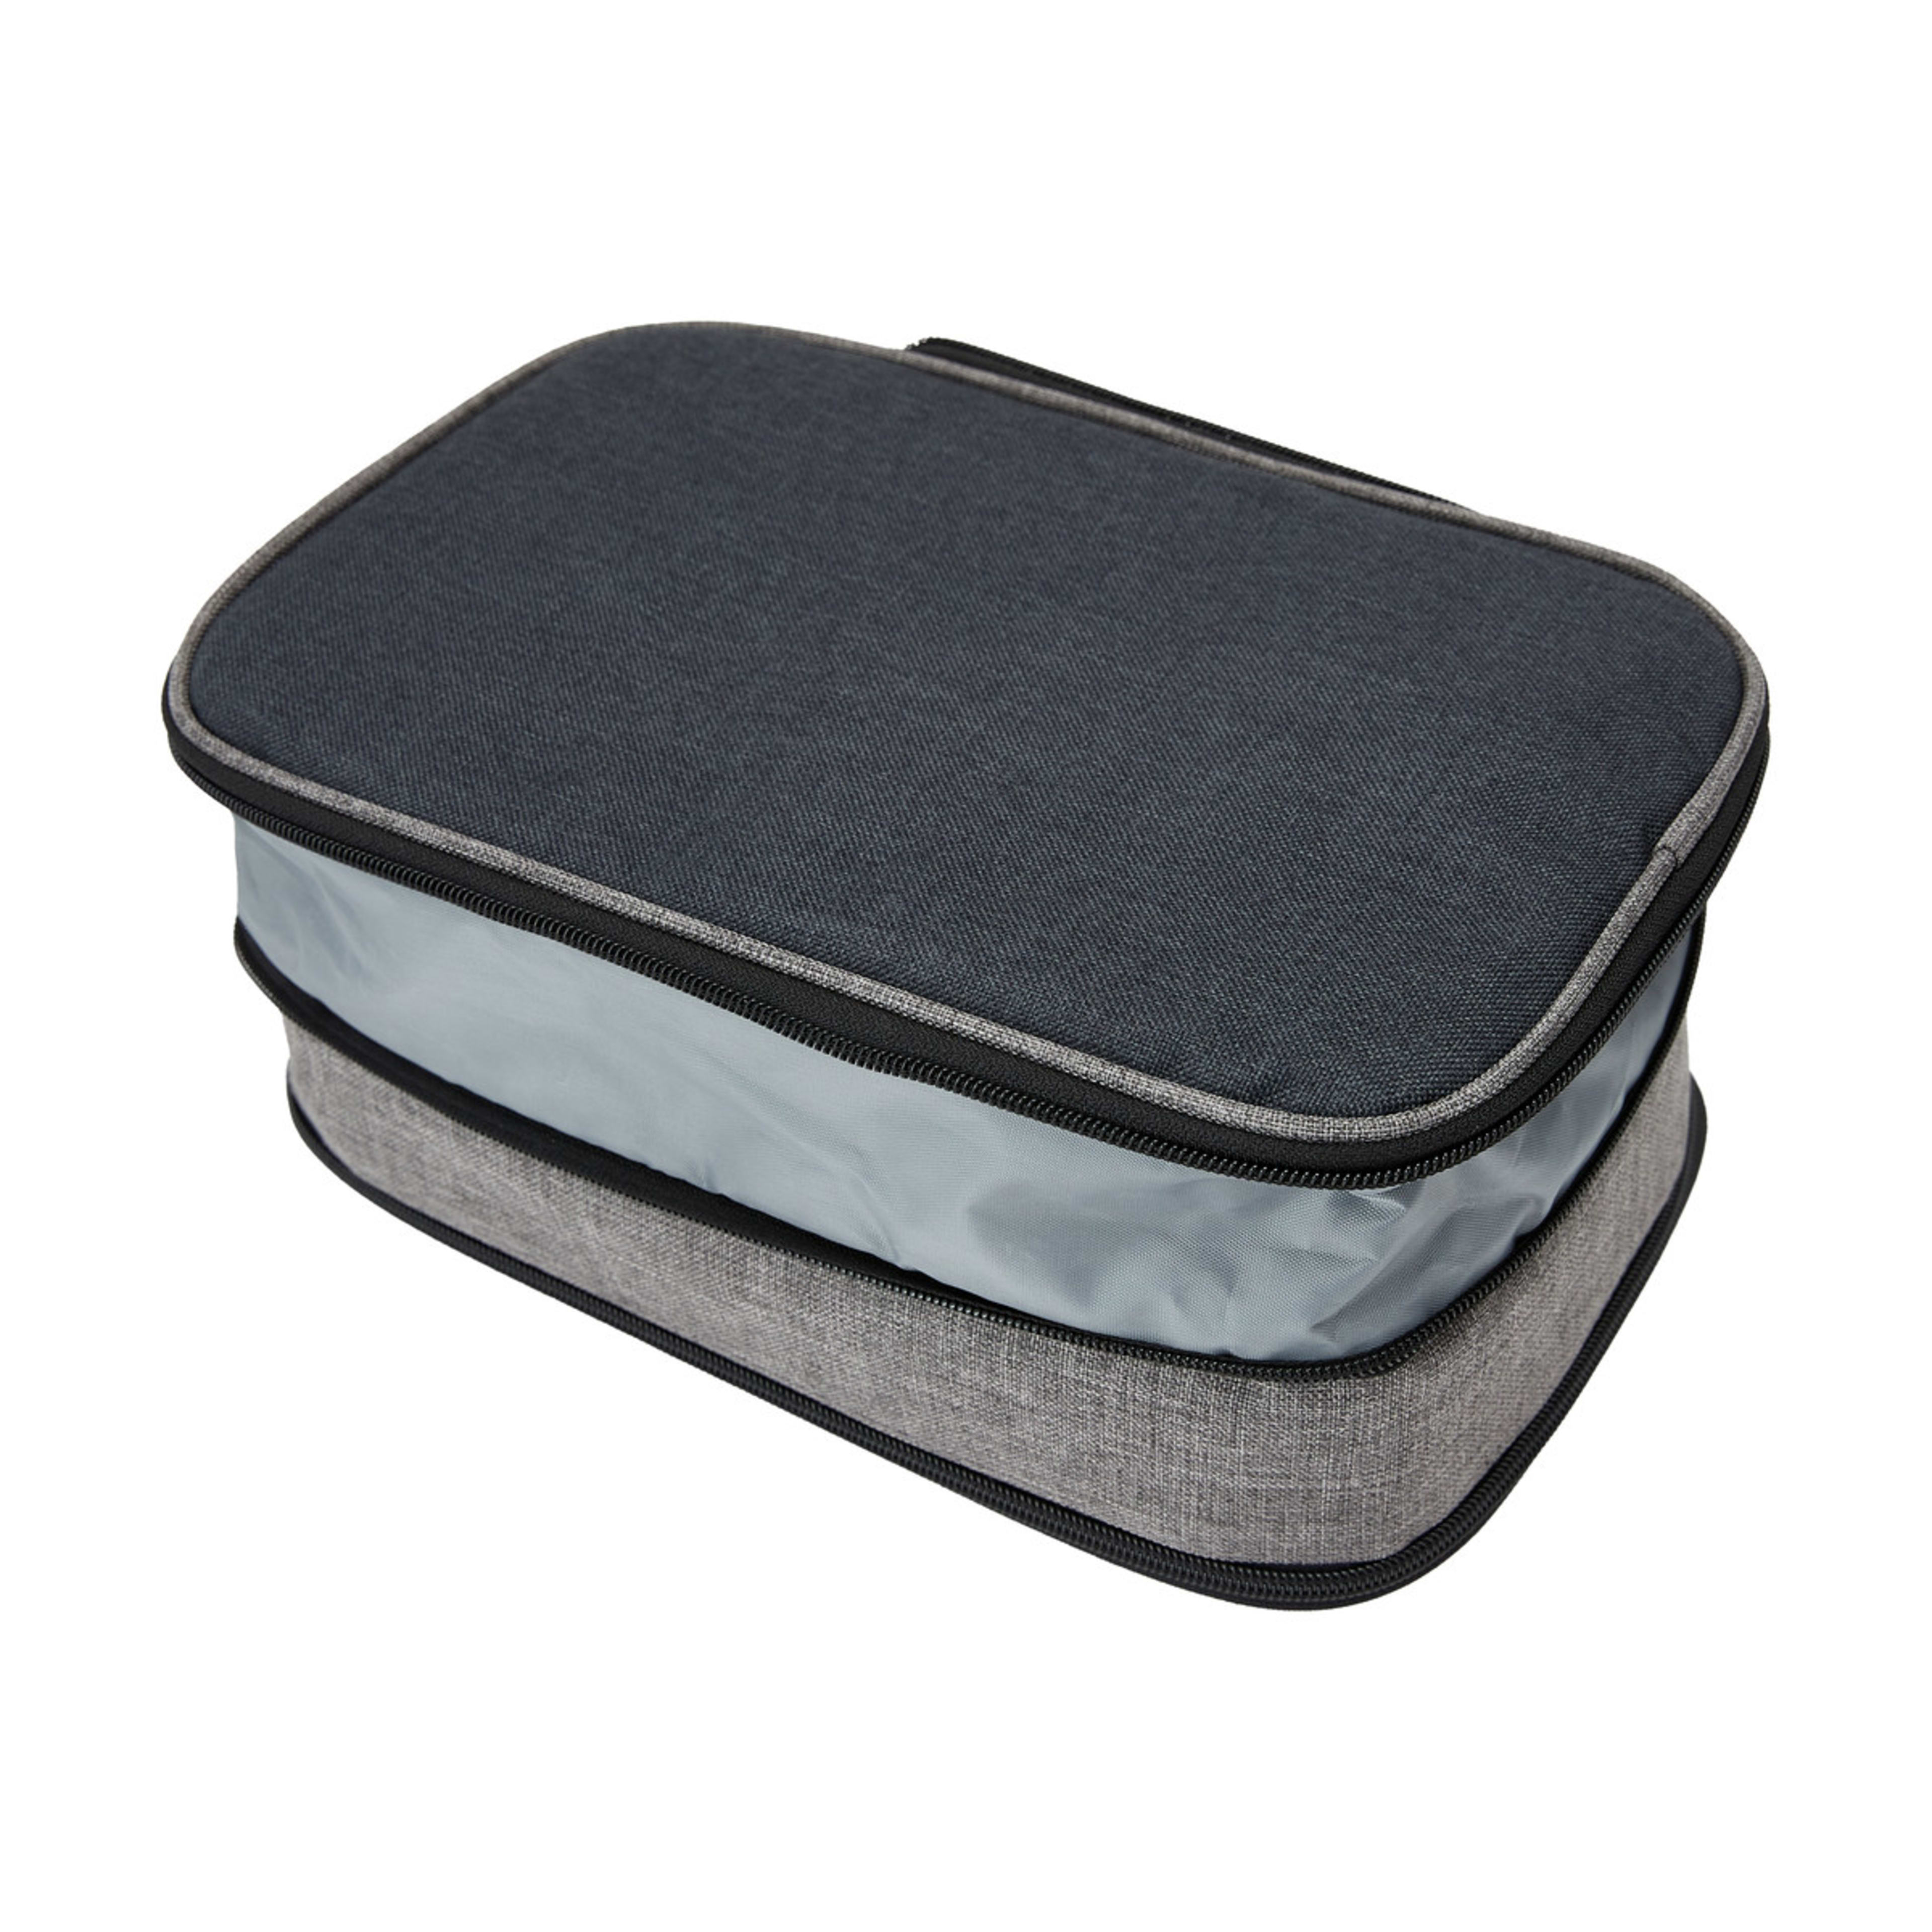 Black Expandable Insulated Cold Box - Kmart